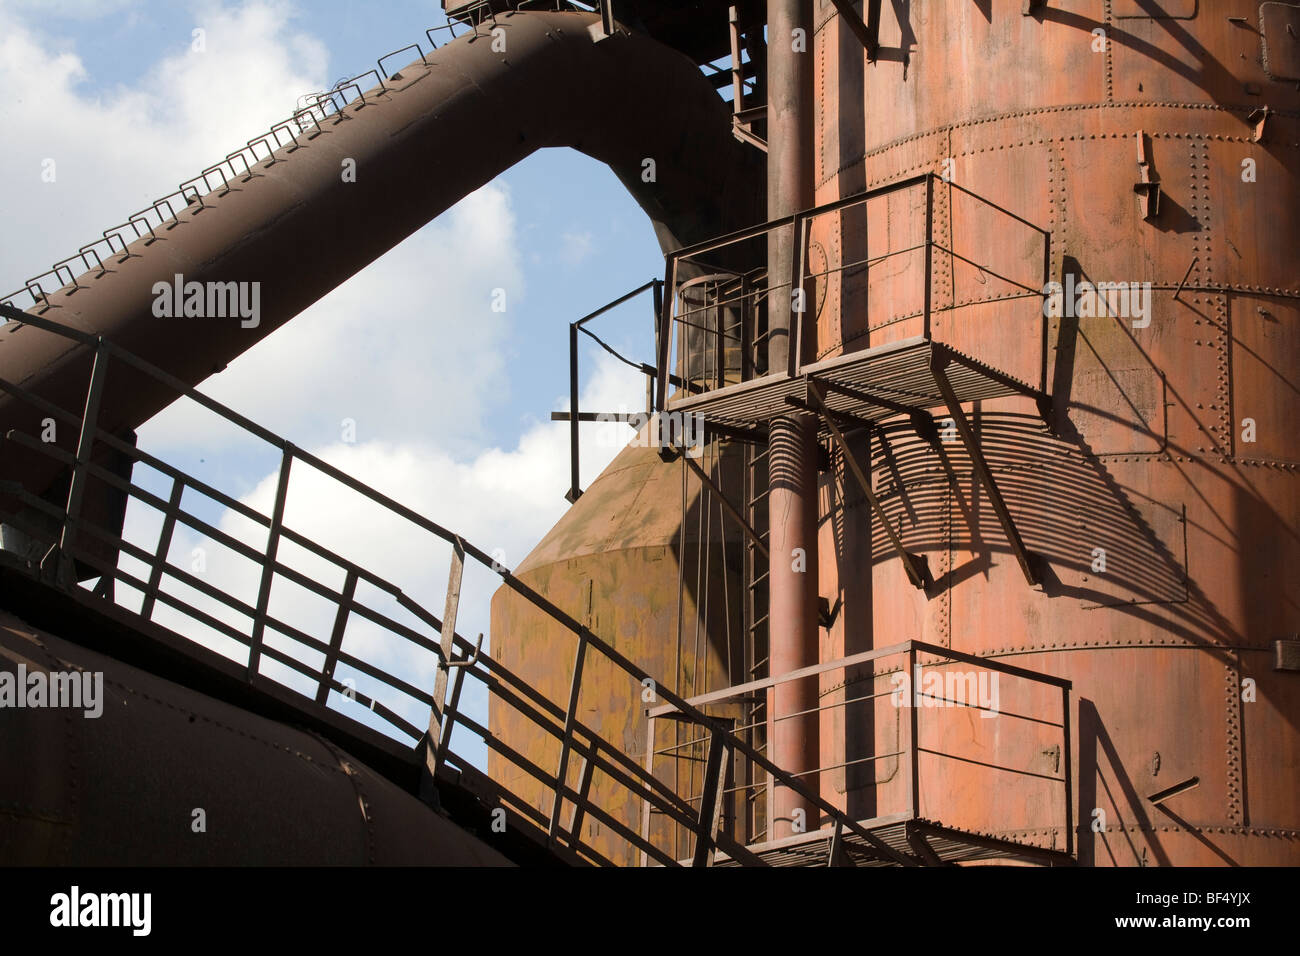 abandoned factories Tagil, ural industrial area russia Stock Photo